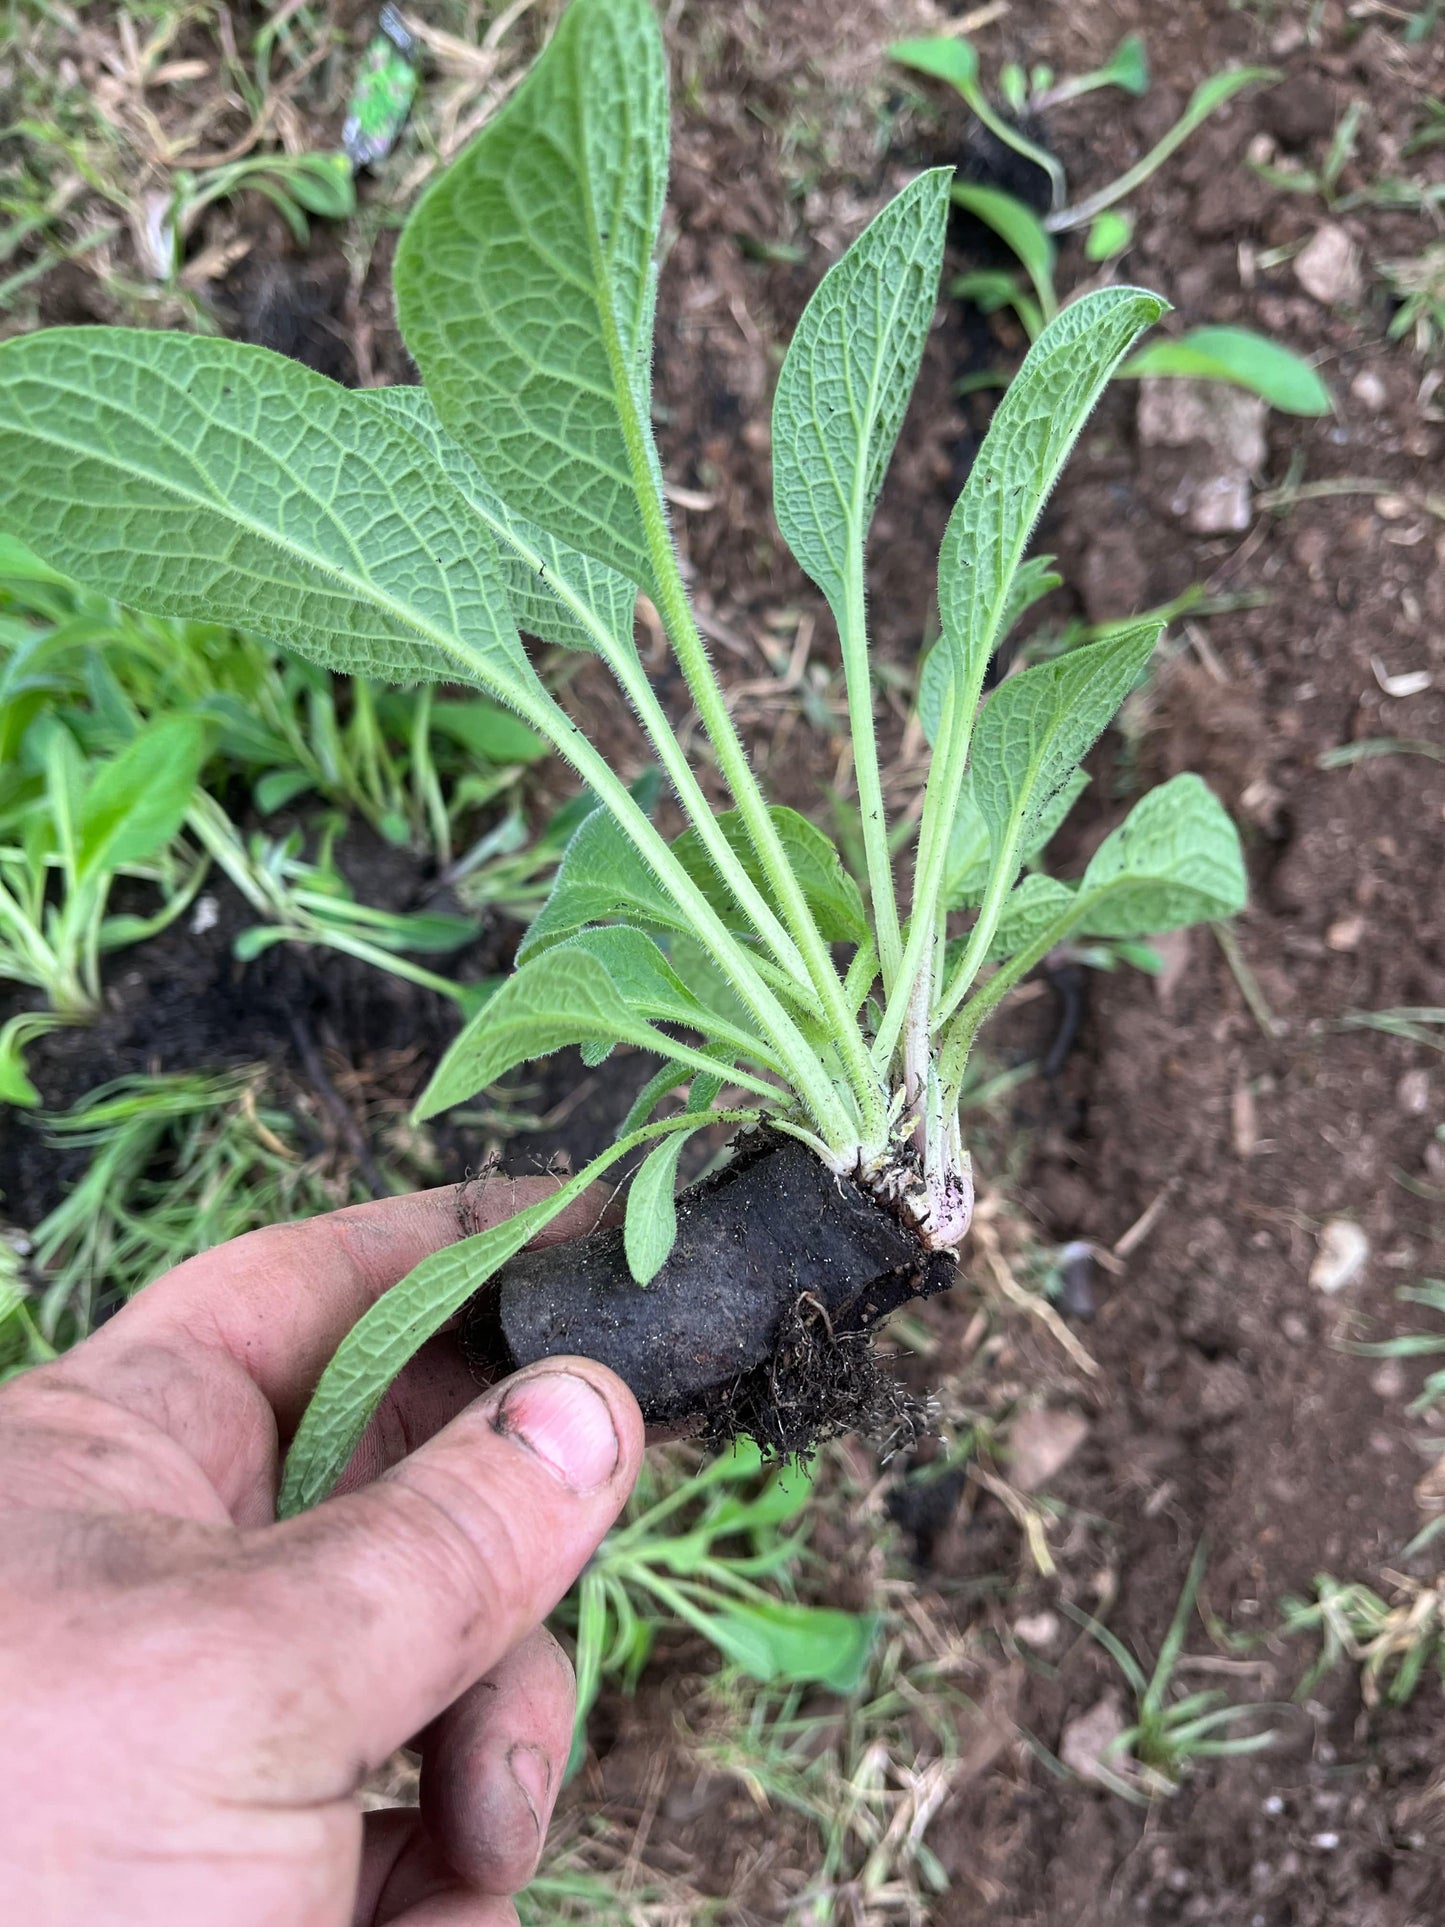 Comfrey plant from cutting